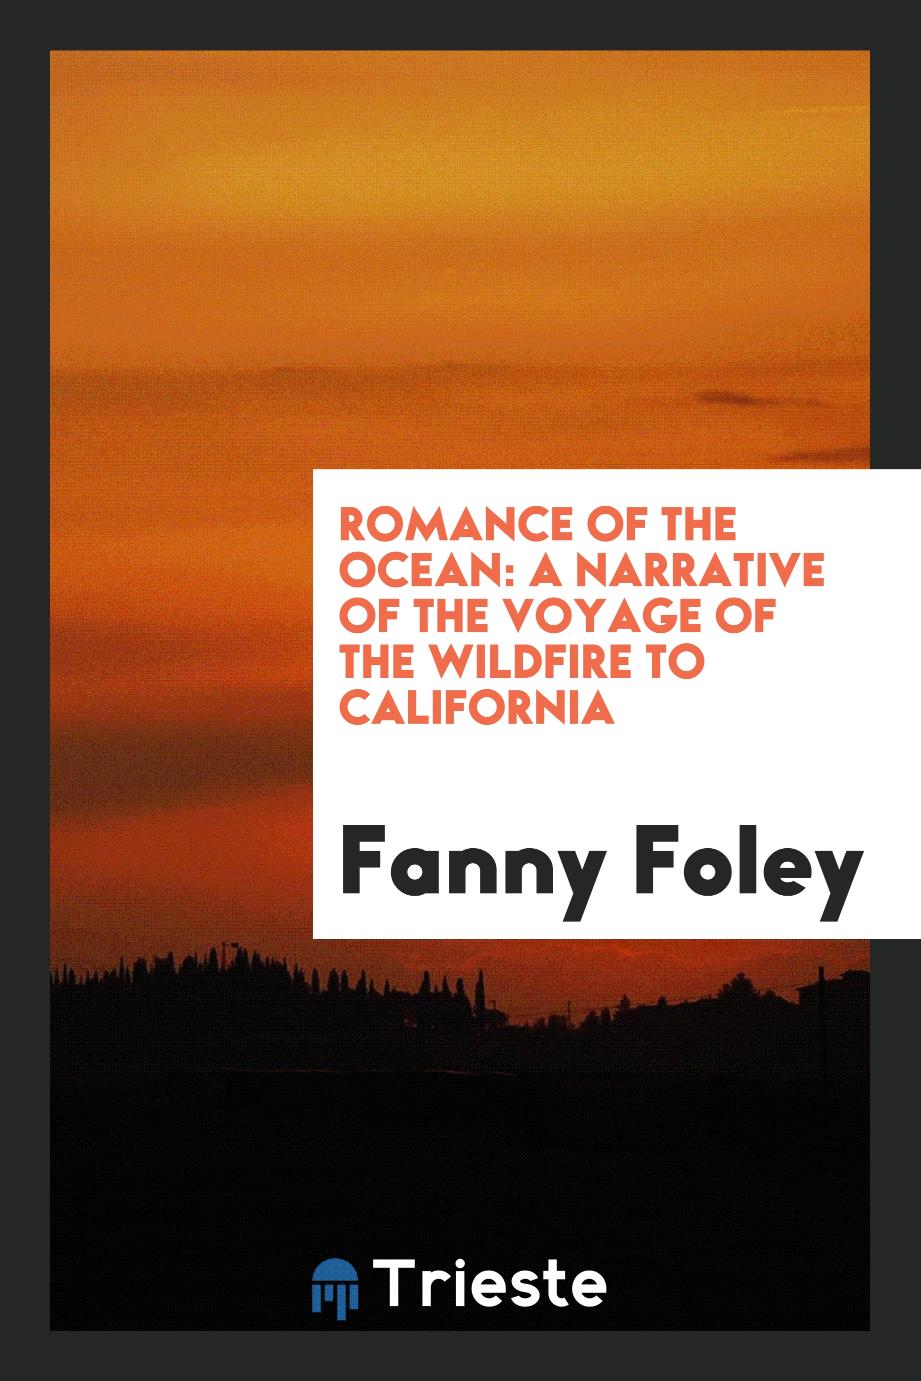 Romance of the Ocean: a Narrative of the Voyage of the Wildfire to California